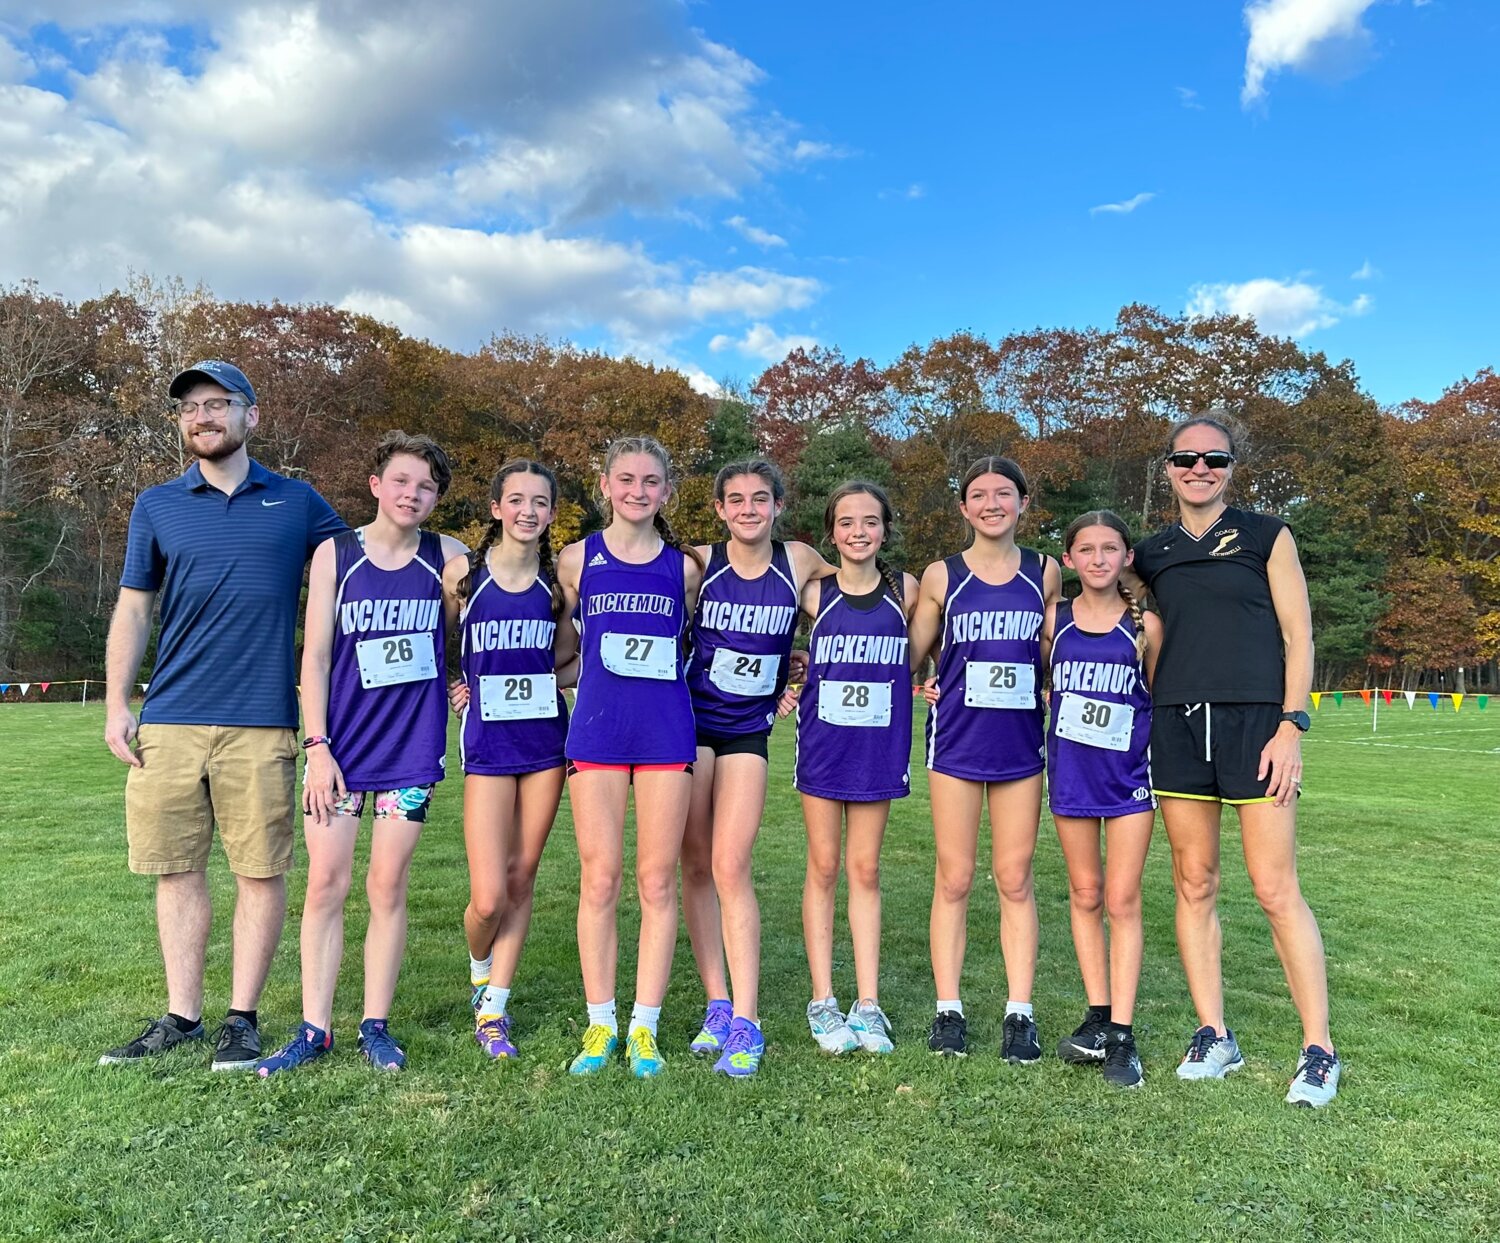 Members of the Kickemuit Middle School girls’ cross country team, with Eleanor Lial (middle, bib number 27) and coach Renae Cicchinelli (far right).